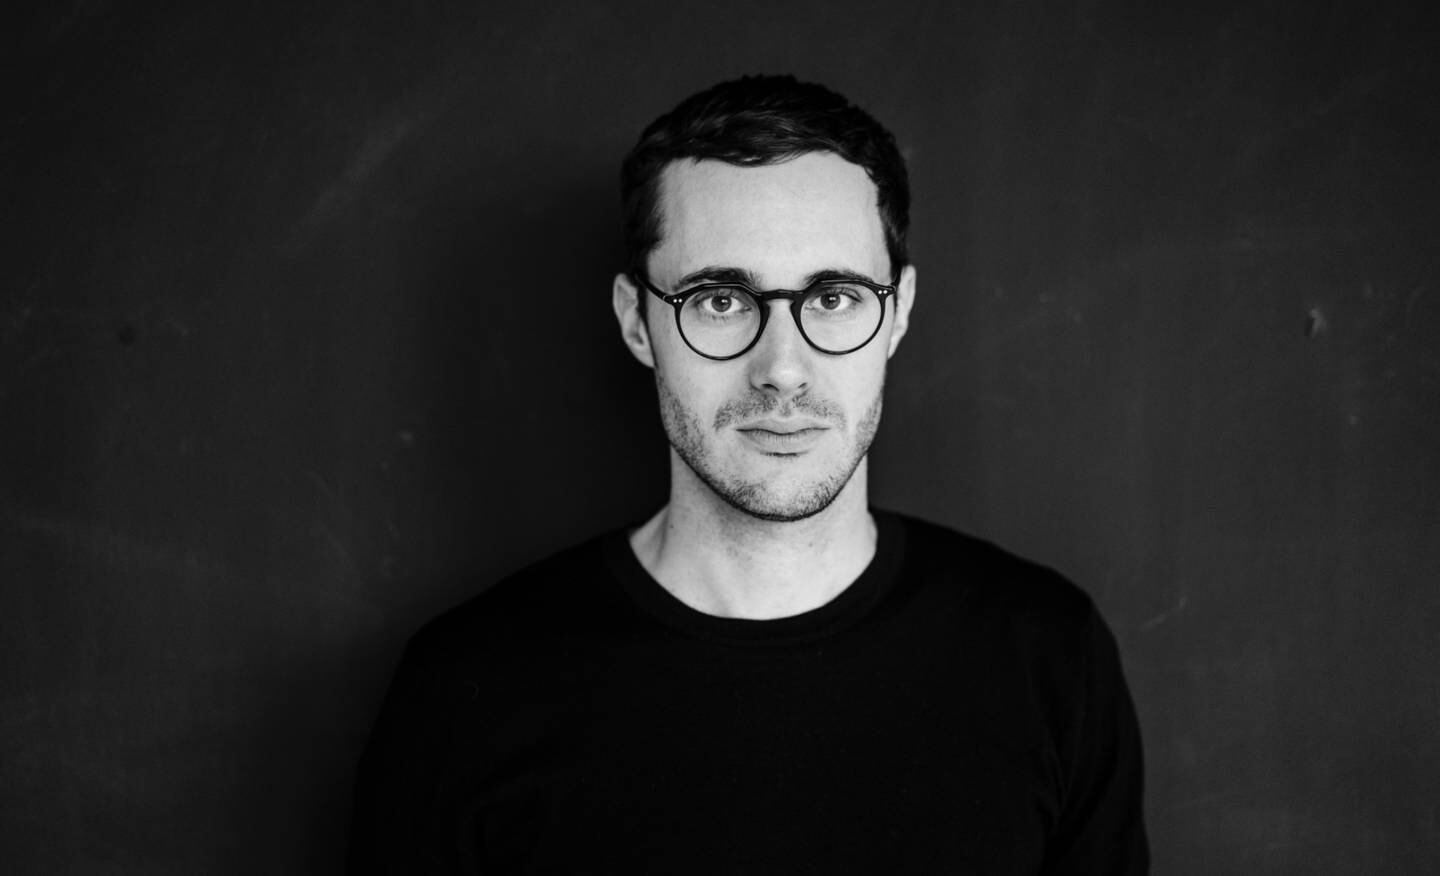 Former Paco Rabanne fashion chief Bastien Daguzan is joining Jacquemus as CEO.